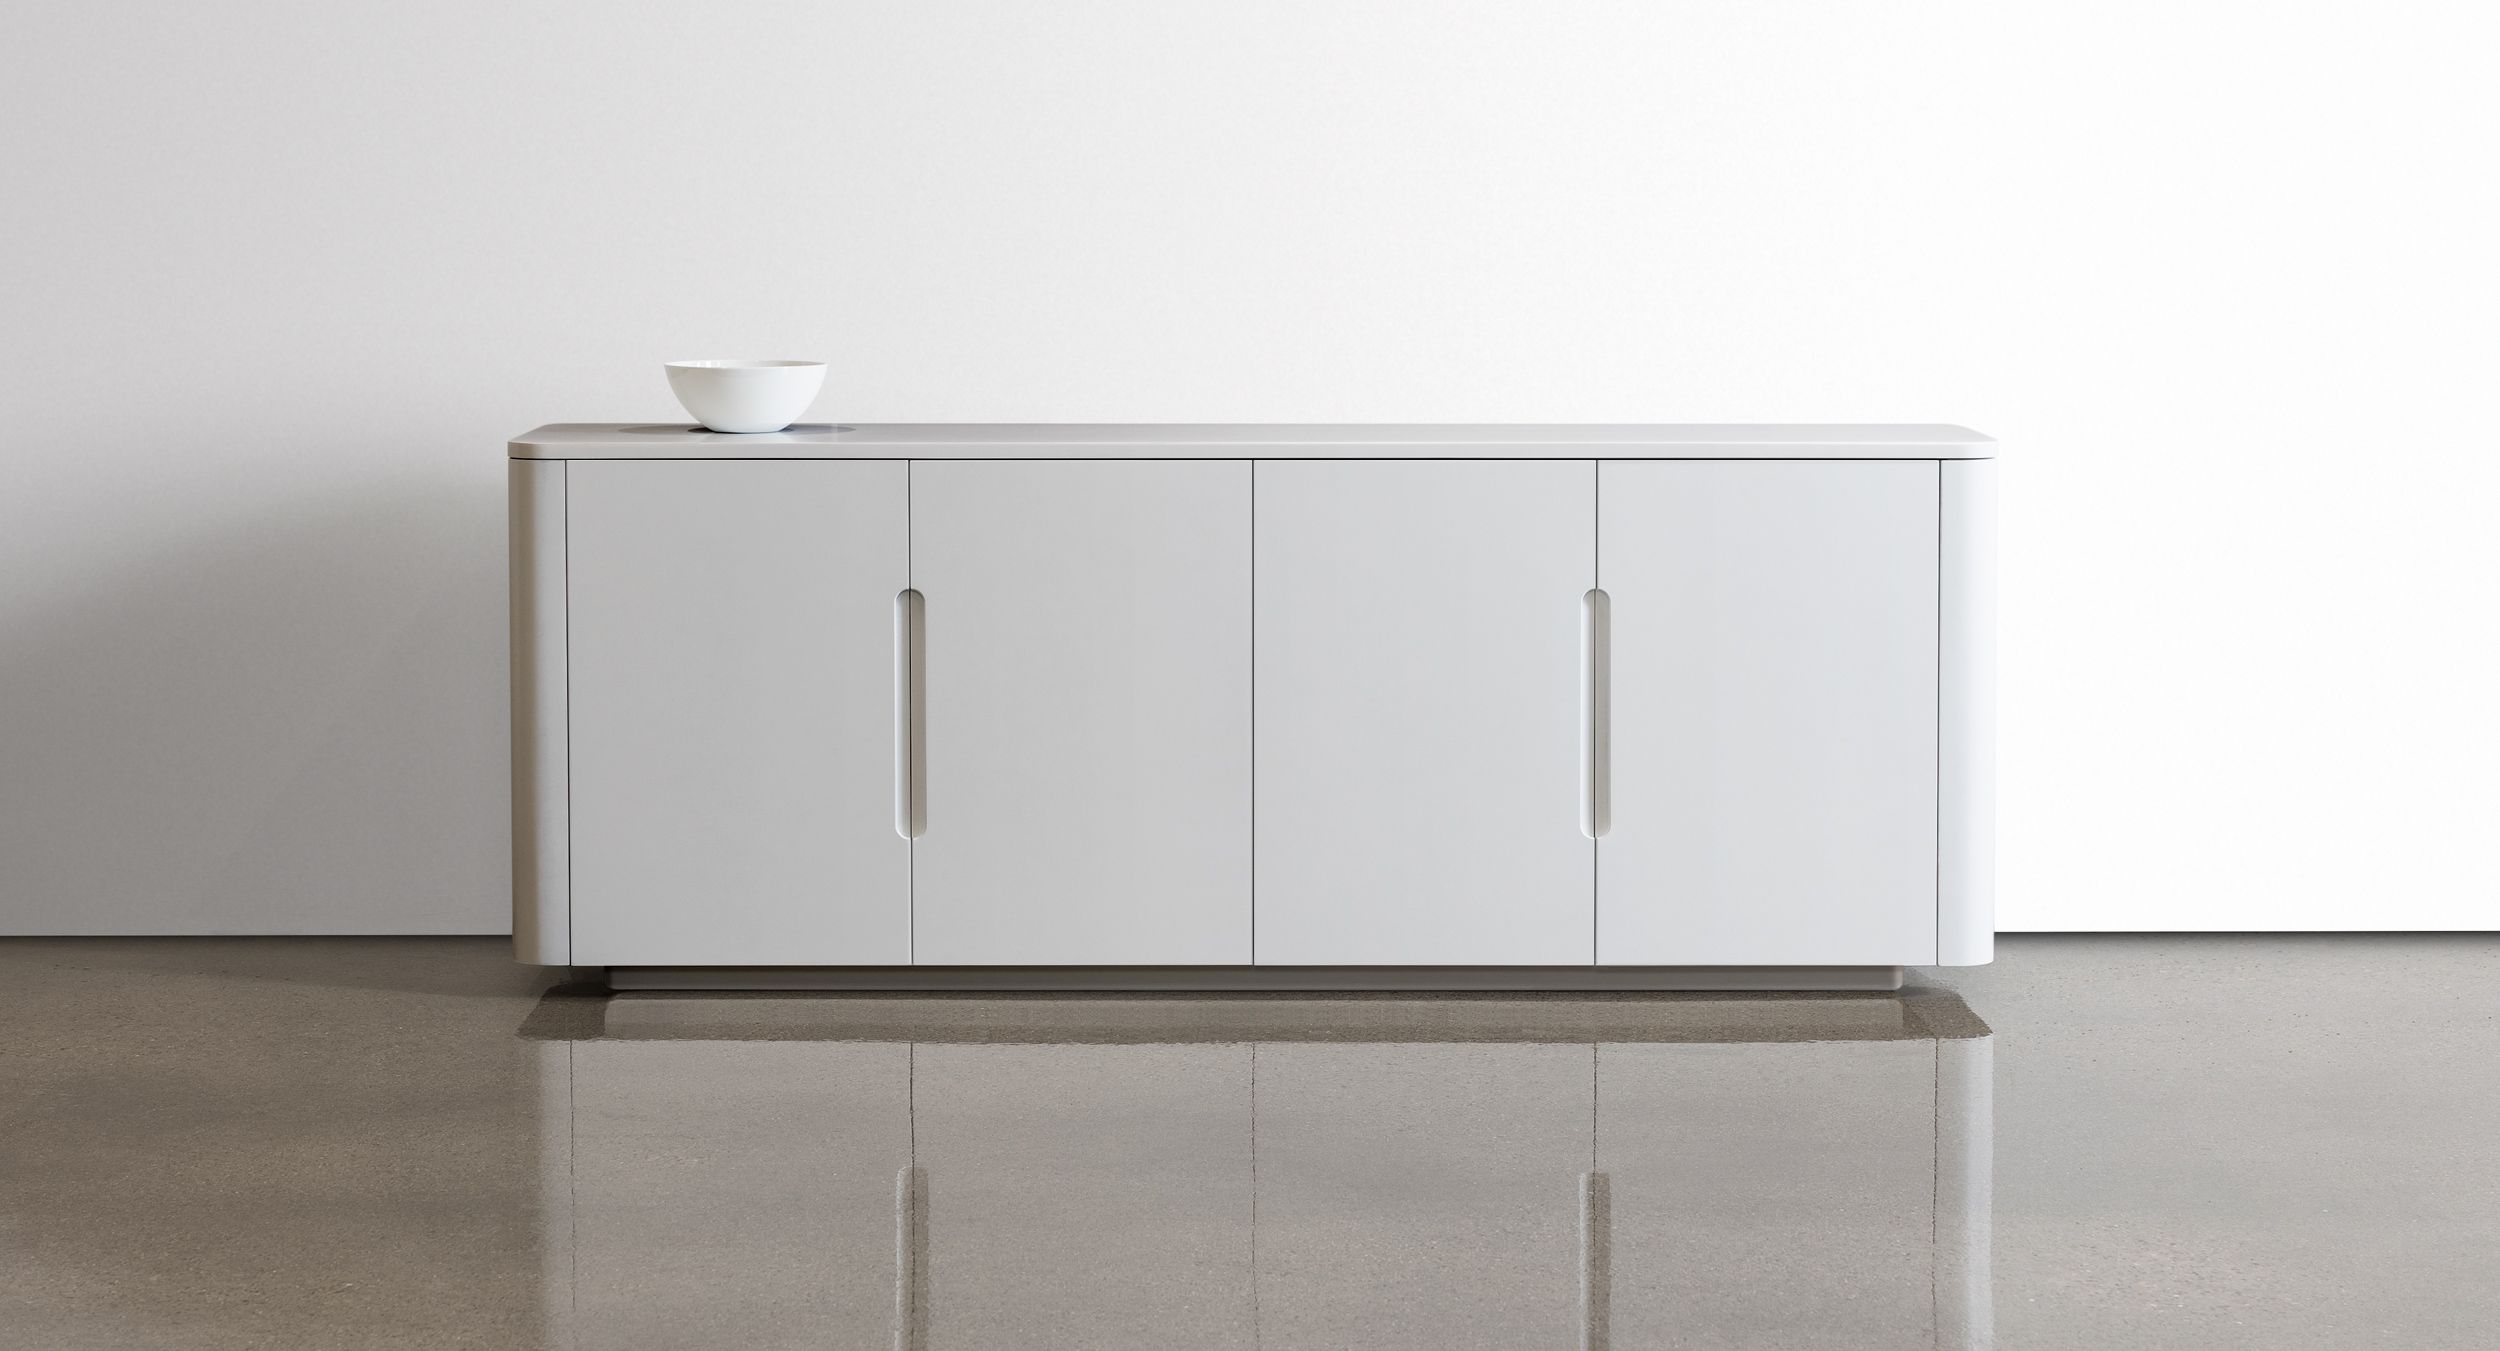 Crew credenzas feature clean, graceful lines with beautiful, integral finger pulls.